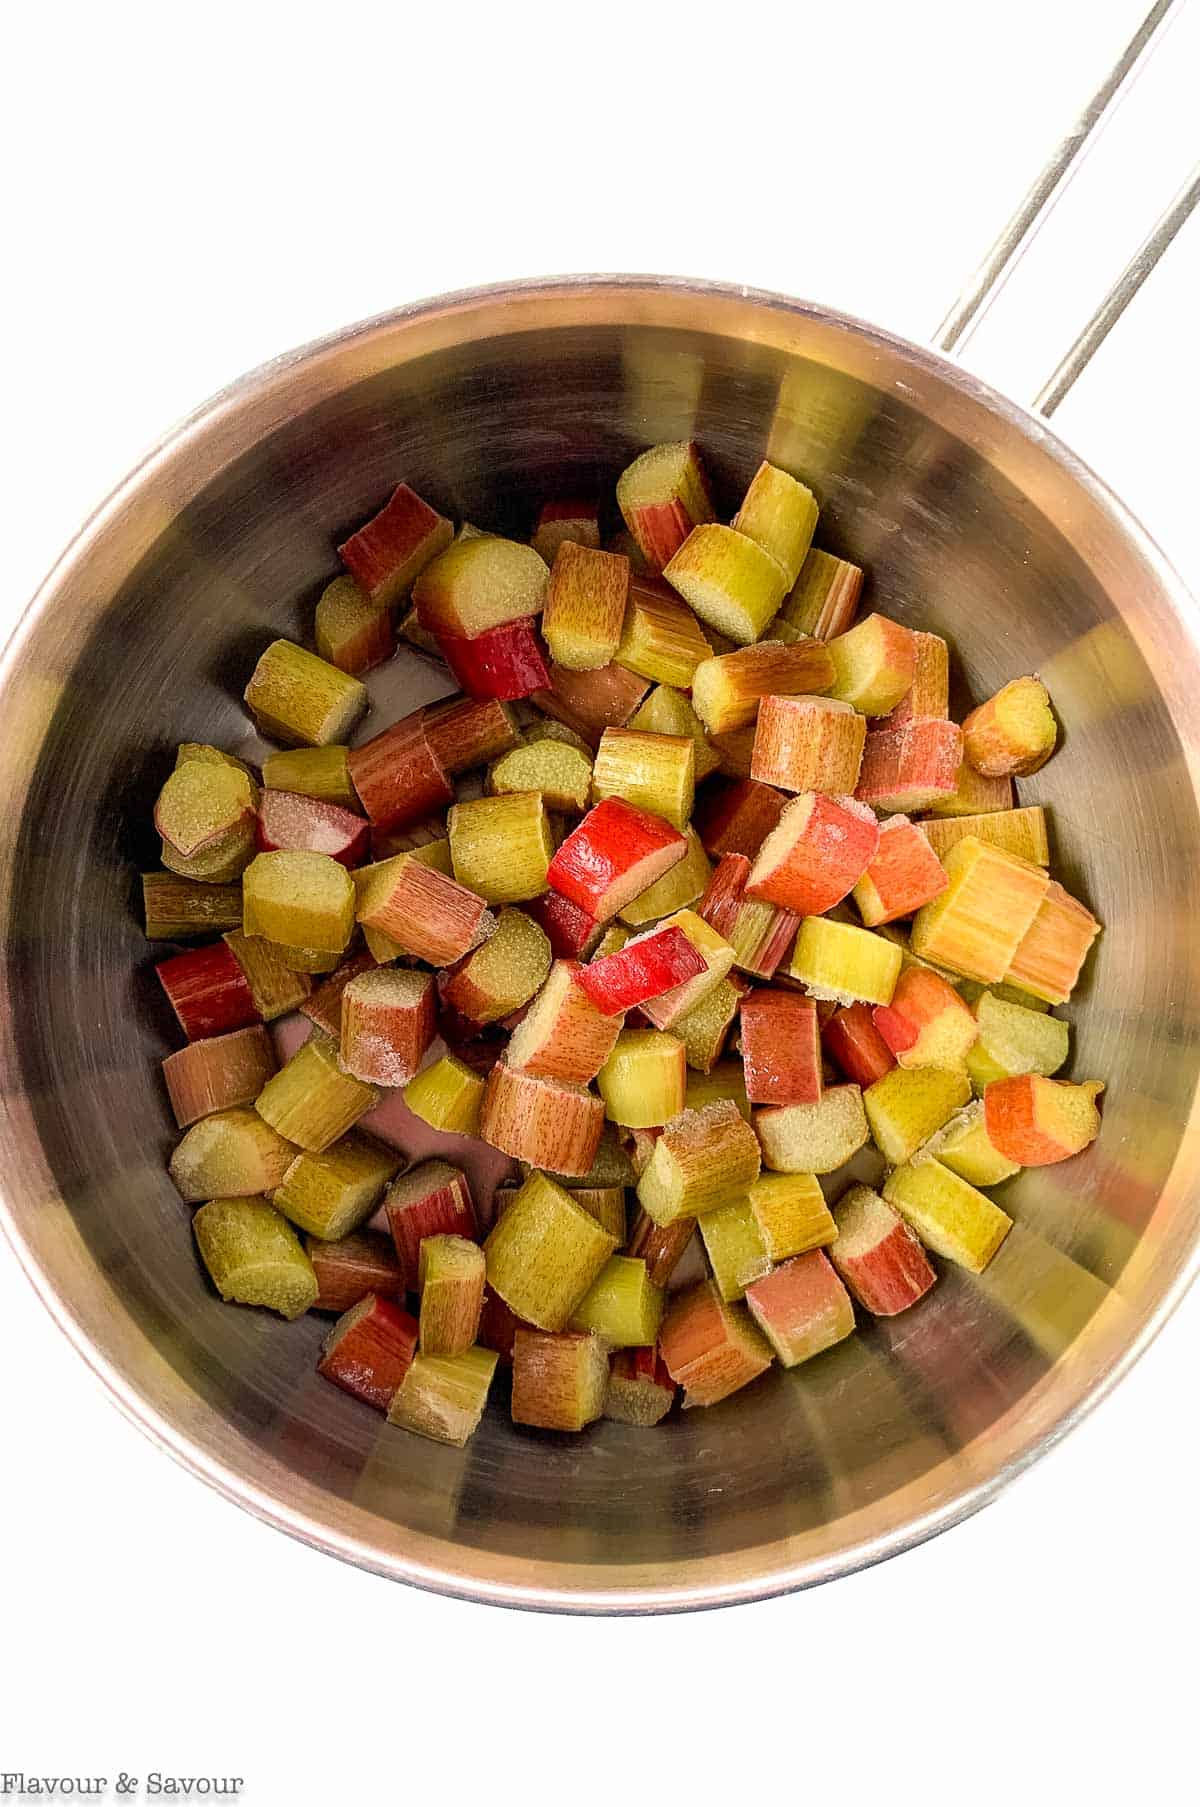 A saucepan with chopped rhubarb pieces.